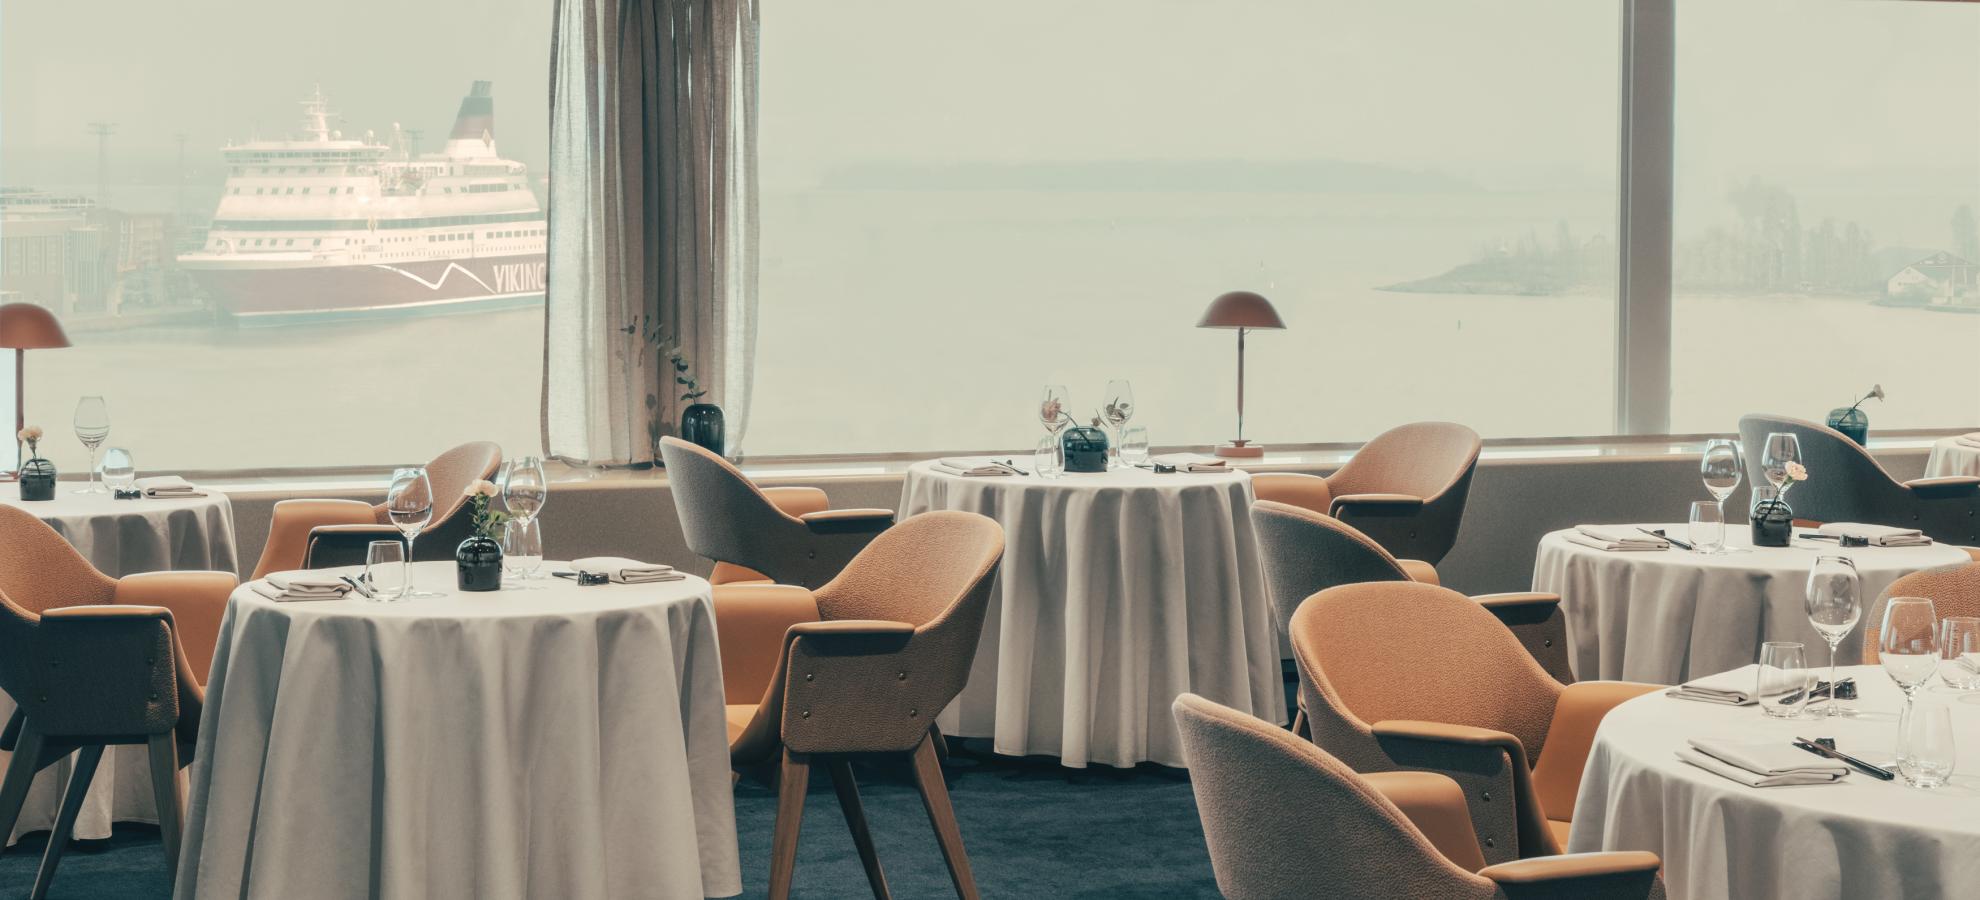 A view from inside Ravintola Palace overlooking a very misty Helsinki harbour, a cruise ship docked to the left. 5 tables can be seen in the photo, neatly set with folded, white table cloths with 70's style designer chairs.